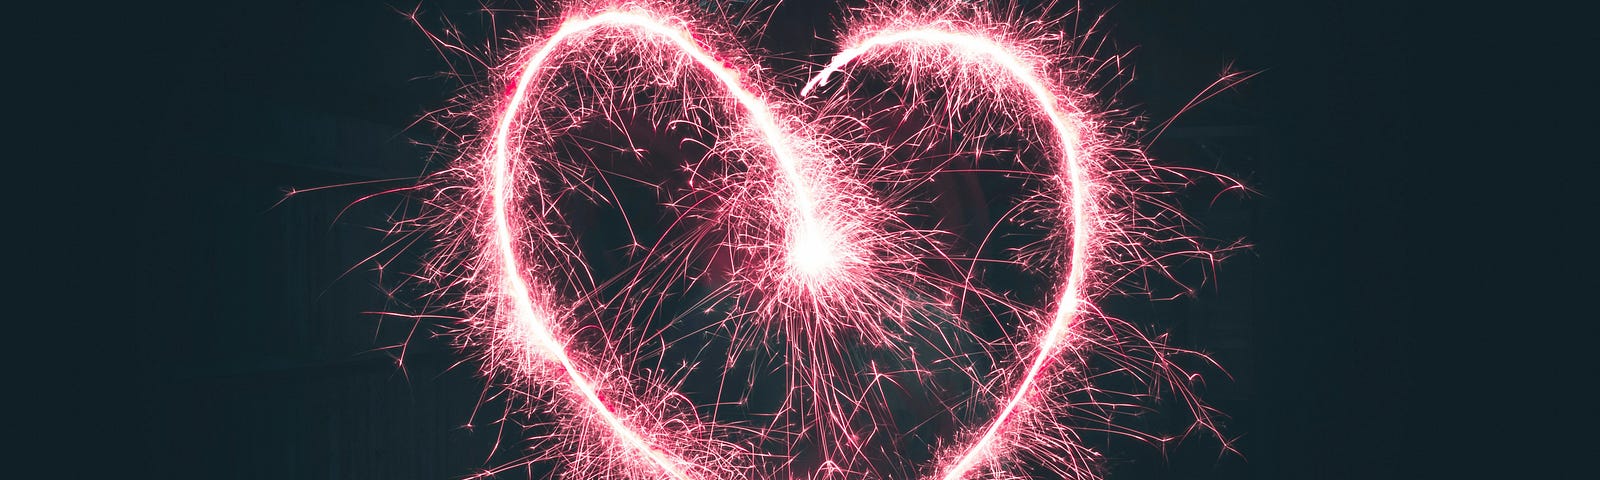 electrified pink heart in a black background